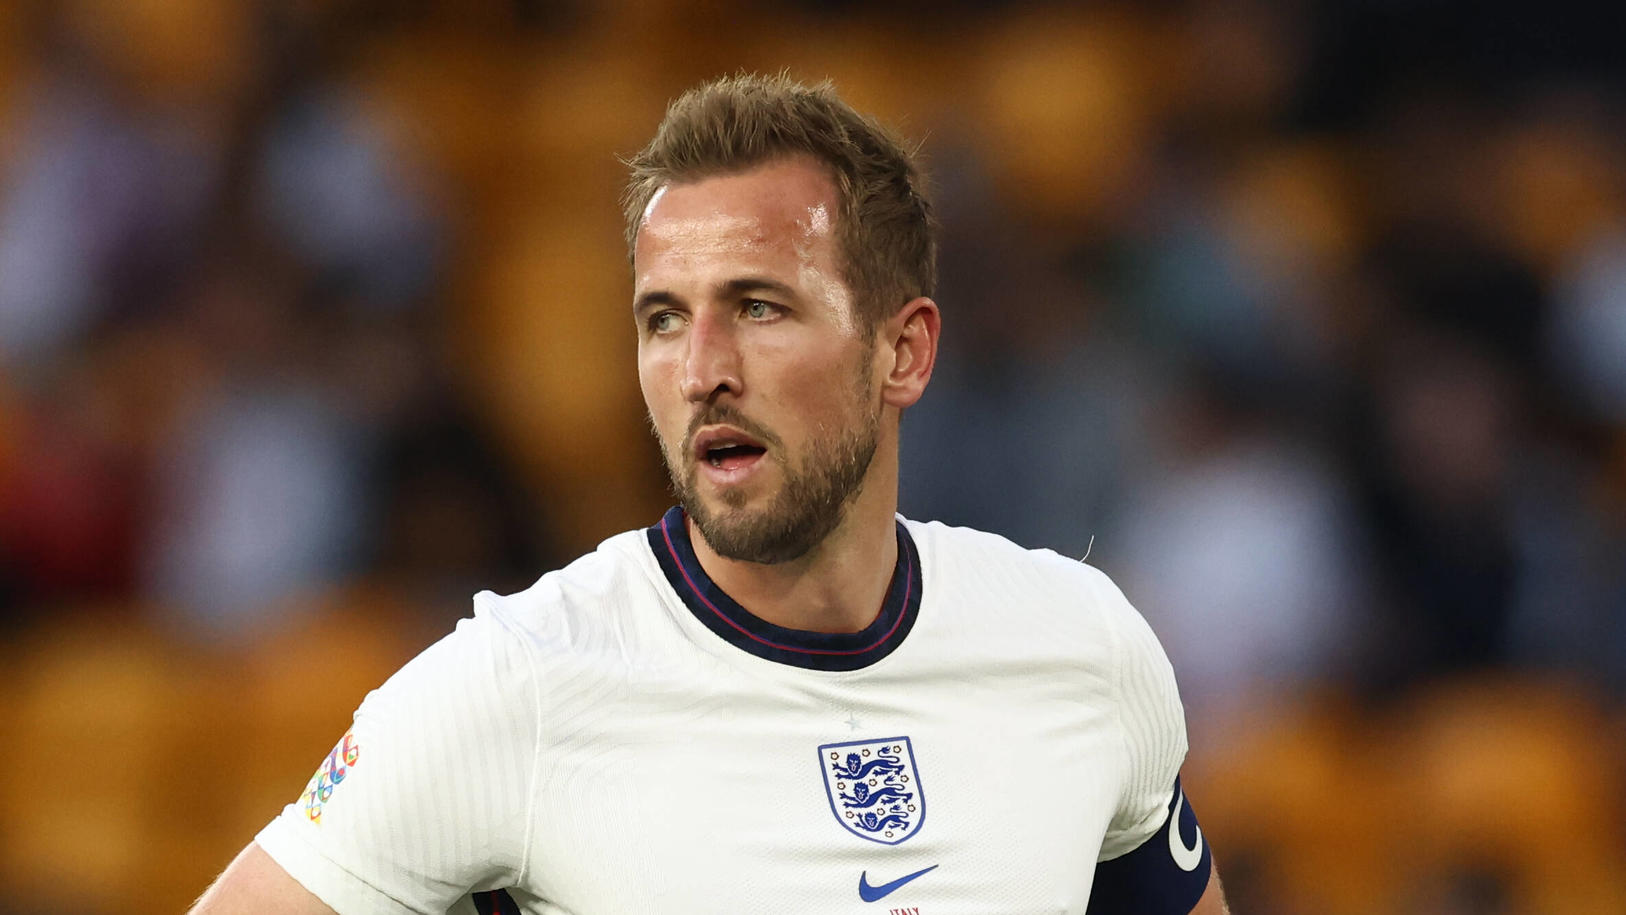  Wolverhampton, England, 11th June 2022. Harry Kane of England during the UEFA Nations League match at Molineux, Wolverhampton. Picture credit should read: Darren Staples / Sportimage PUBLICATIONxNOTxINxUK SPI-1732-0150